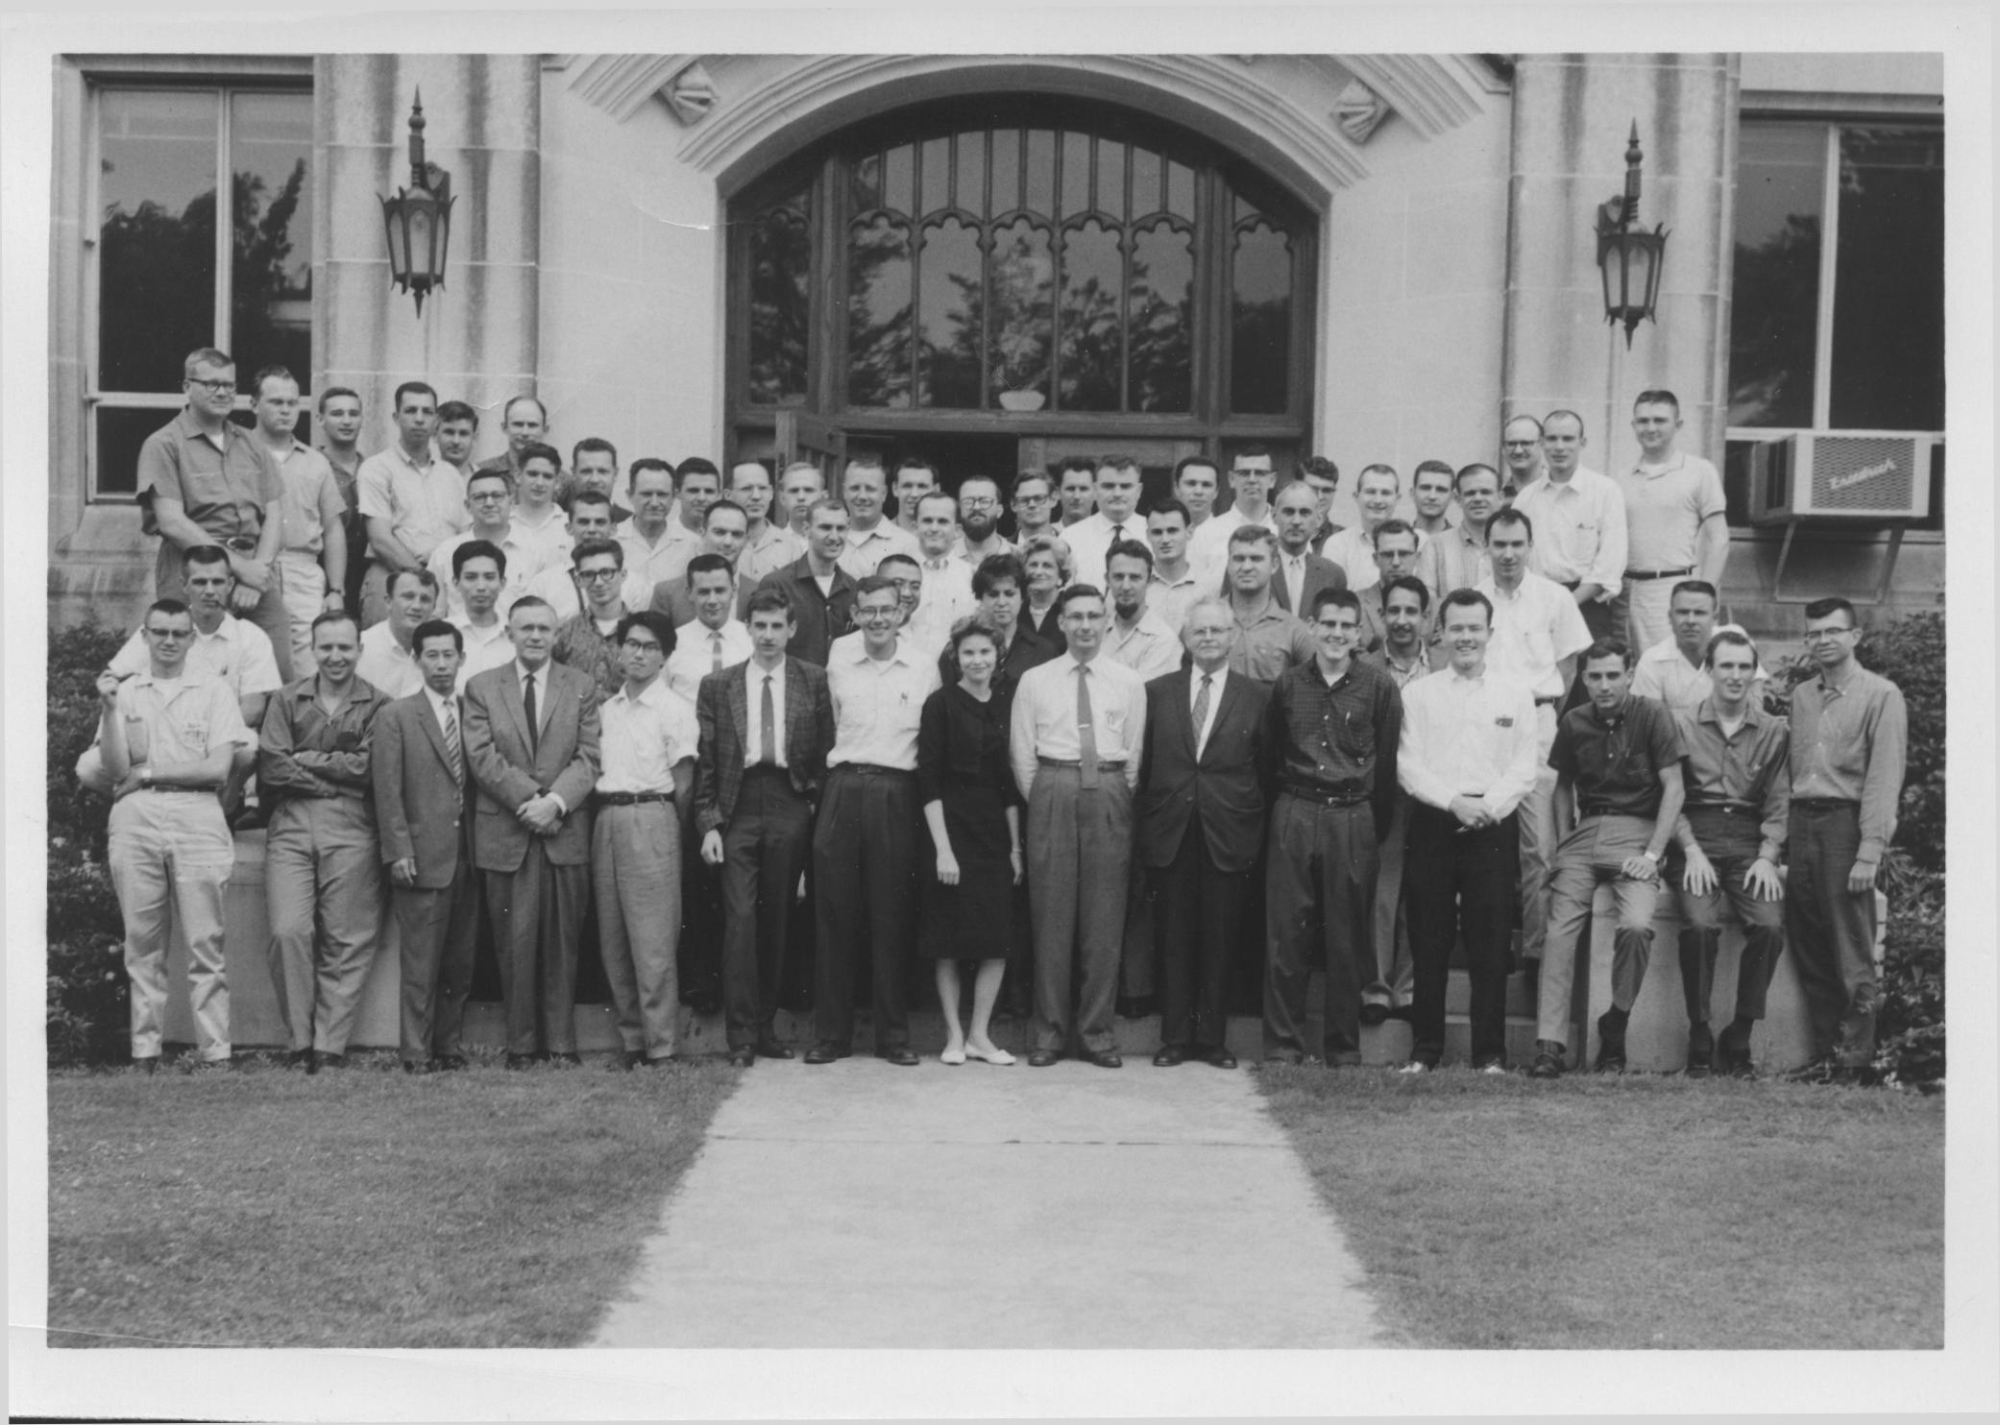 1962-1963 group photo in black and white.